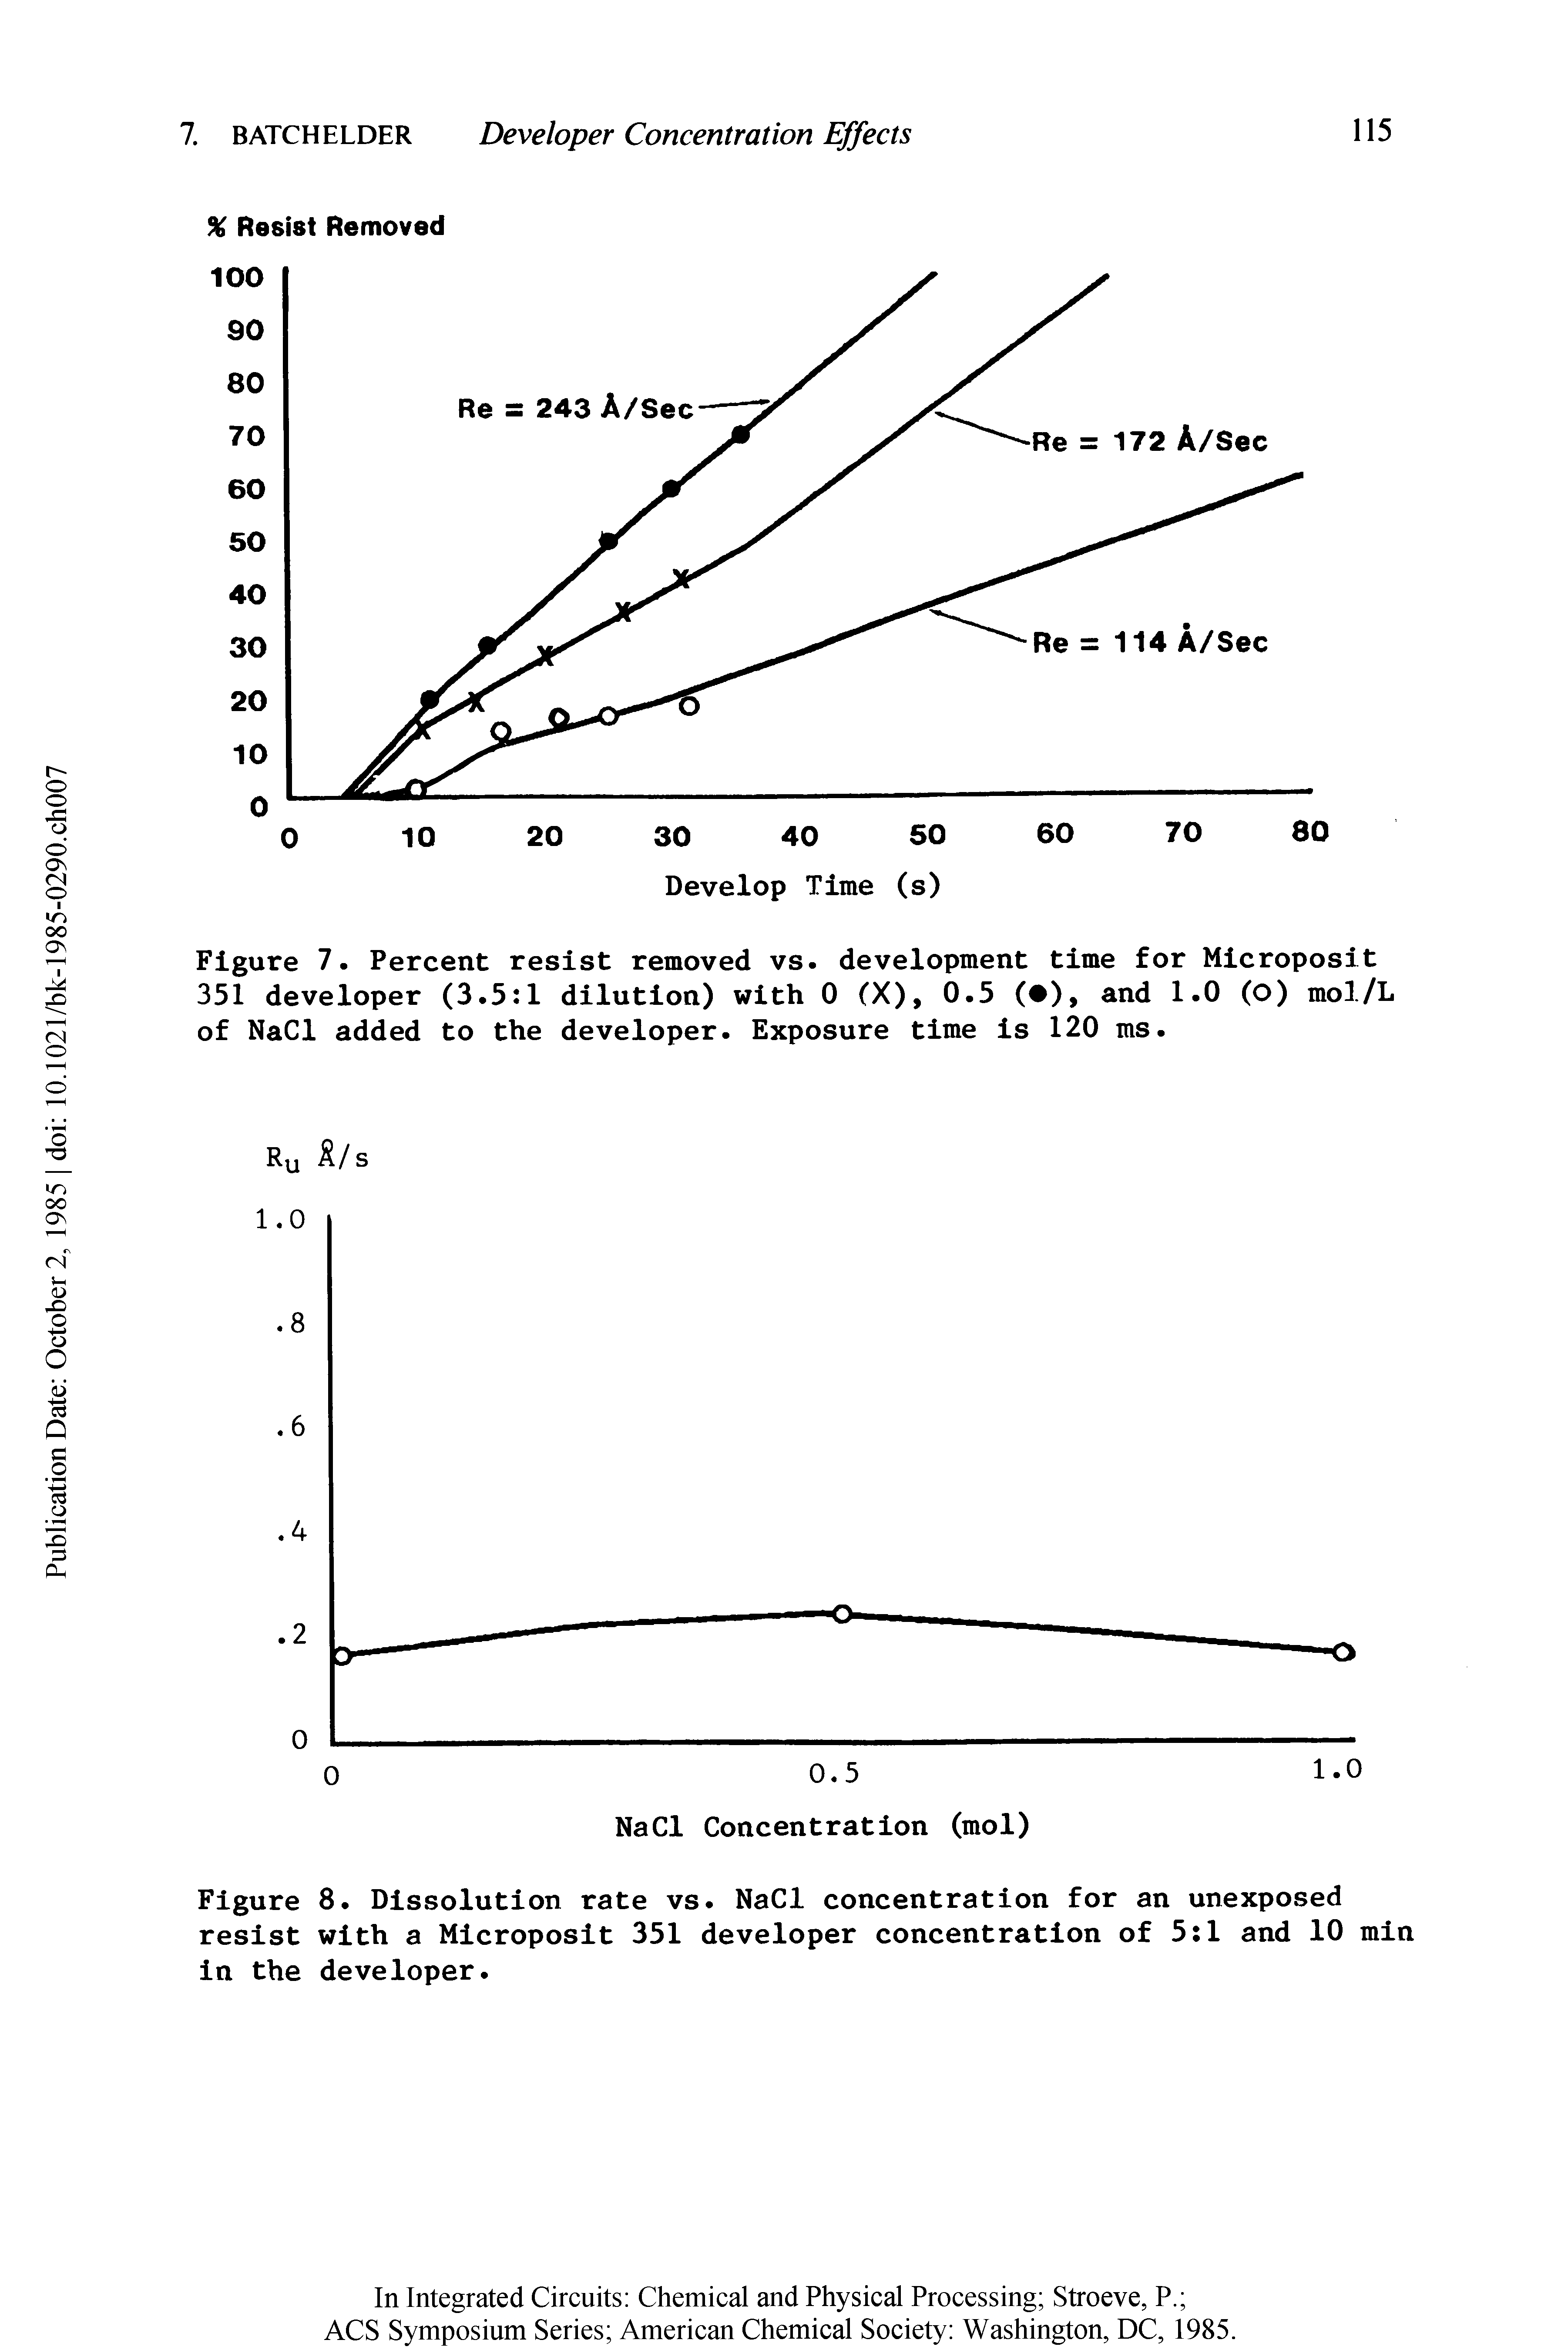 Figure 8. Dissolution rate vs. NaCl concentration for an unexposed resist with a Microposit 351 developer concentration of 5 1 and 10 min in the developer.